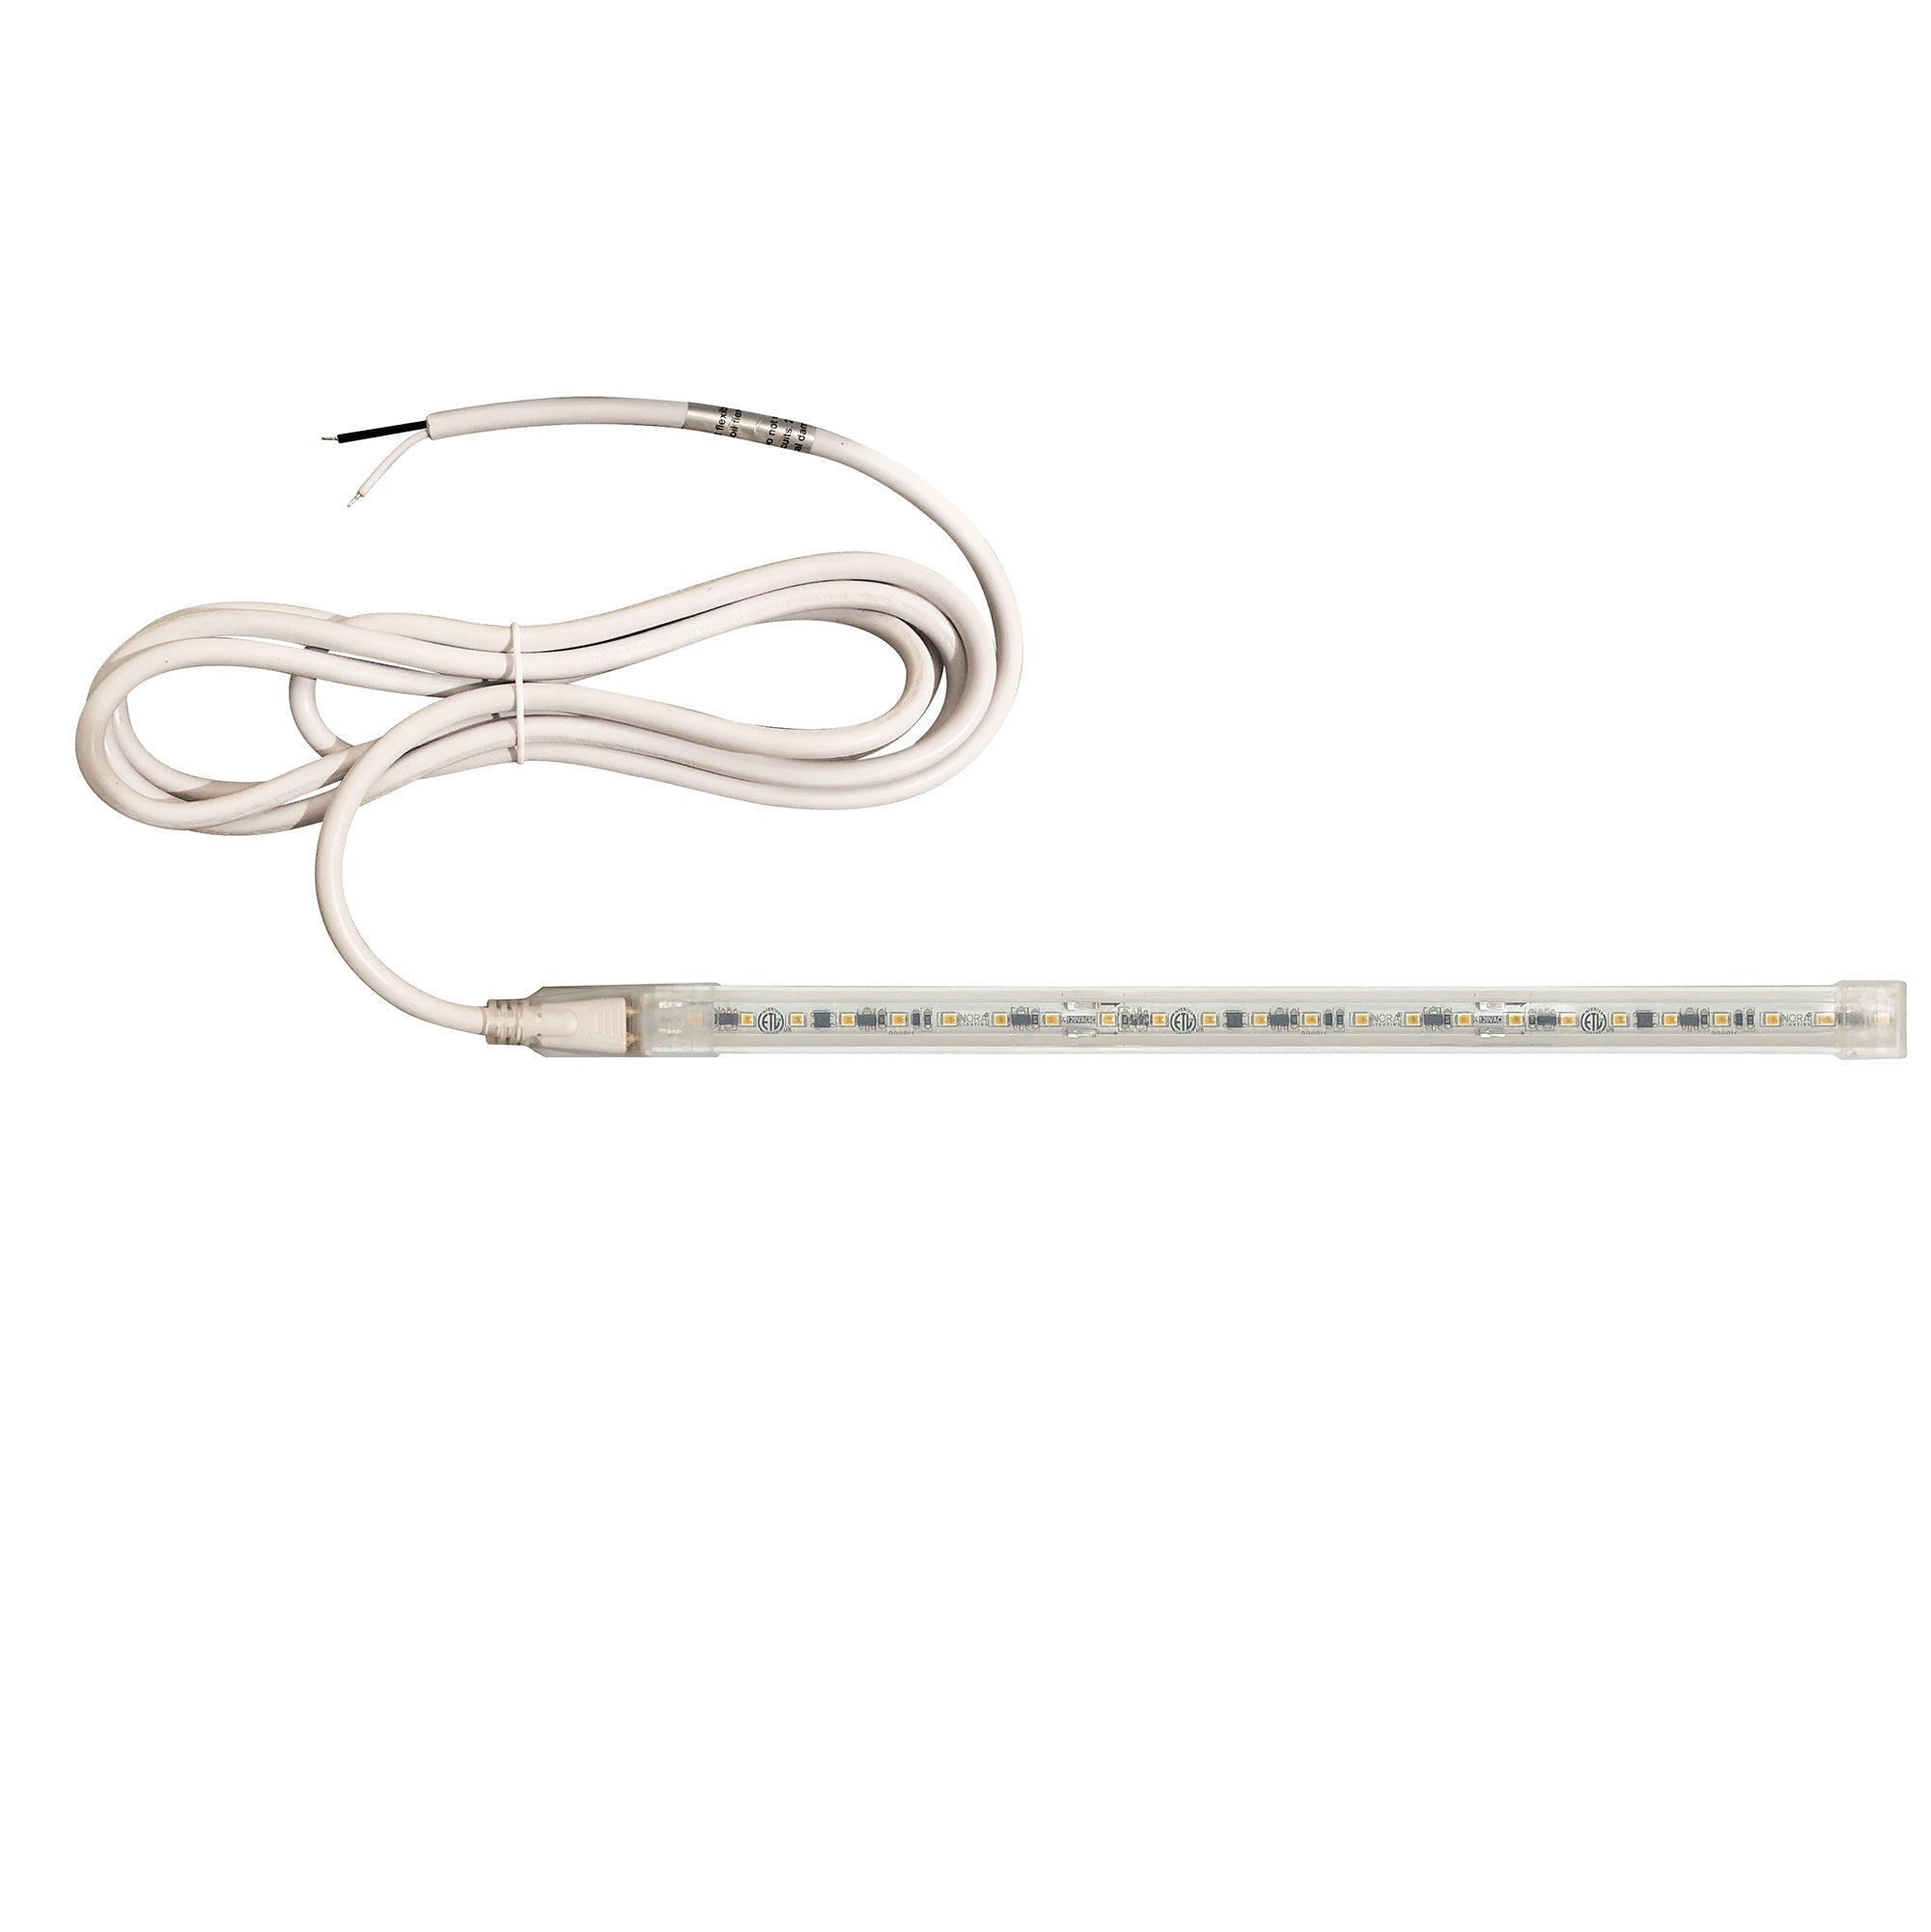 Nora Lighting NUTP13-W80-12-927/HW - Accent / Undercabinet - Custom Cut 80-ft 120V Continuous LED Tape Light, 330lm / 3.6W per foot, 2700K, w/ Mounting Clips and 8' Hardwired Power Cord